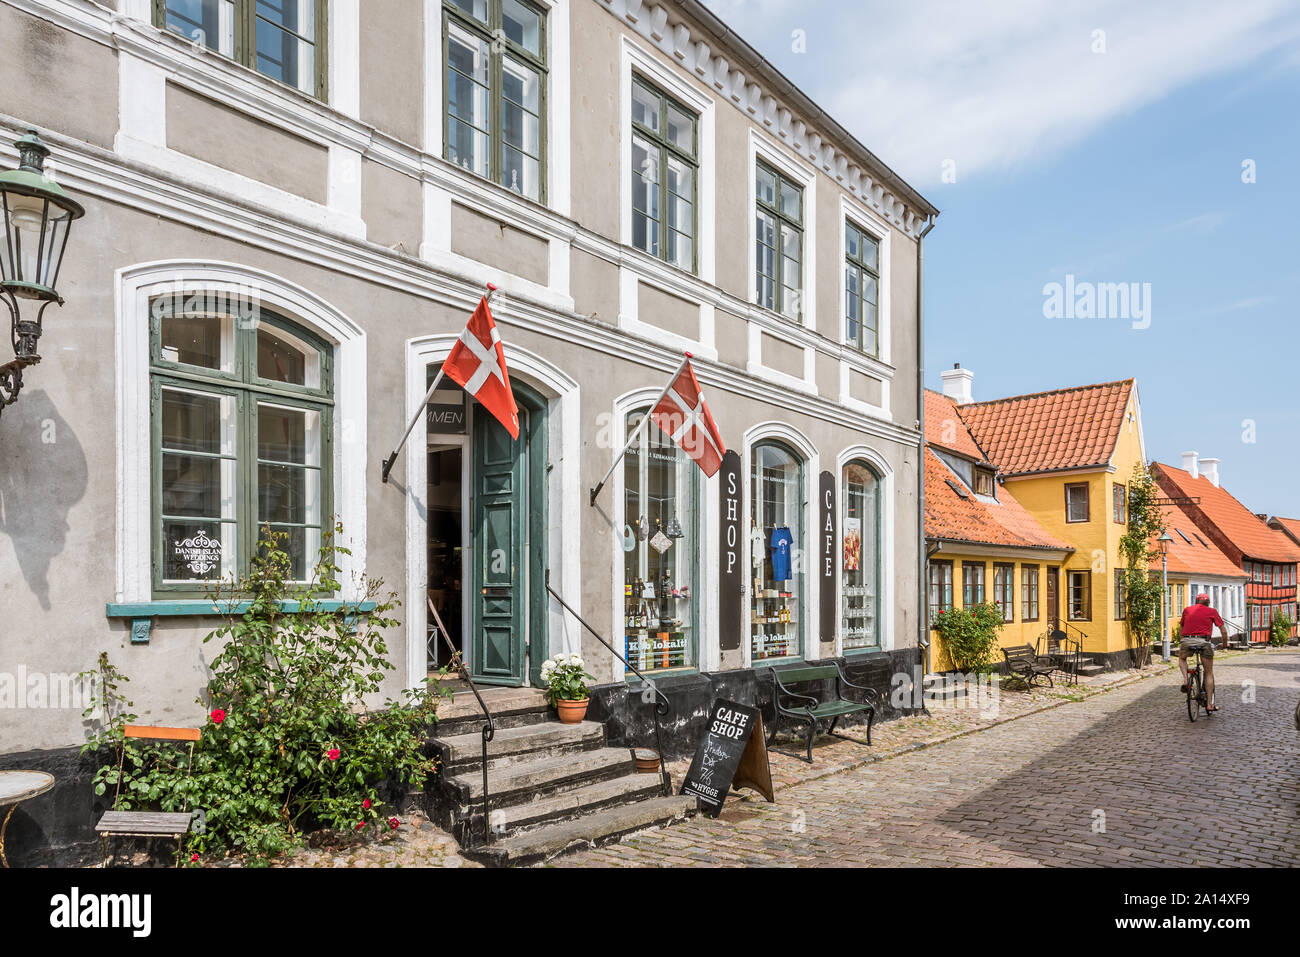 An old retro shop with danish flags in the square of Aeroskobing, Denmark, July 13, 2019 Stock Photo